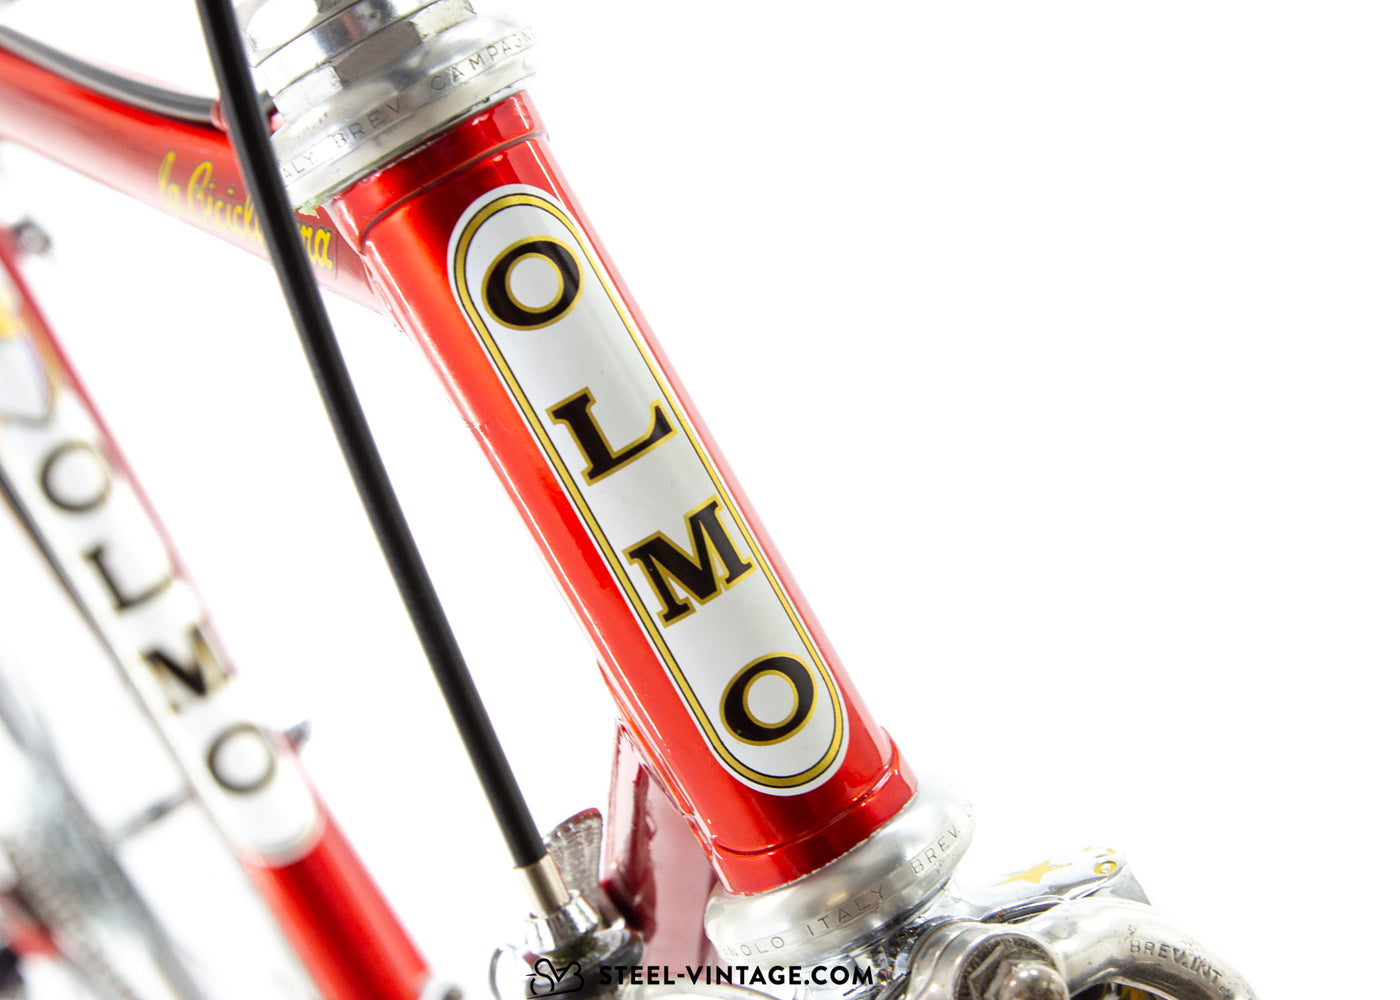 Olmo Competition C Road Bicycle 1980s